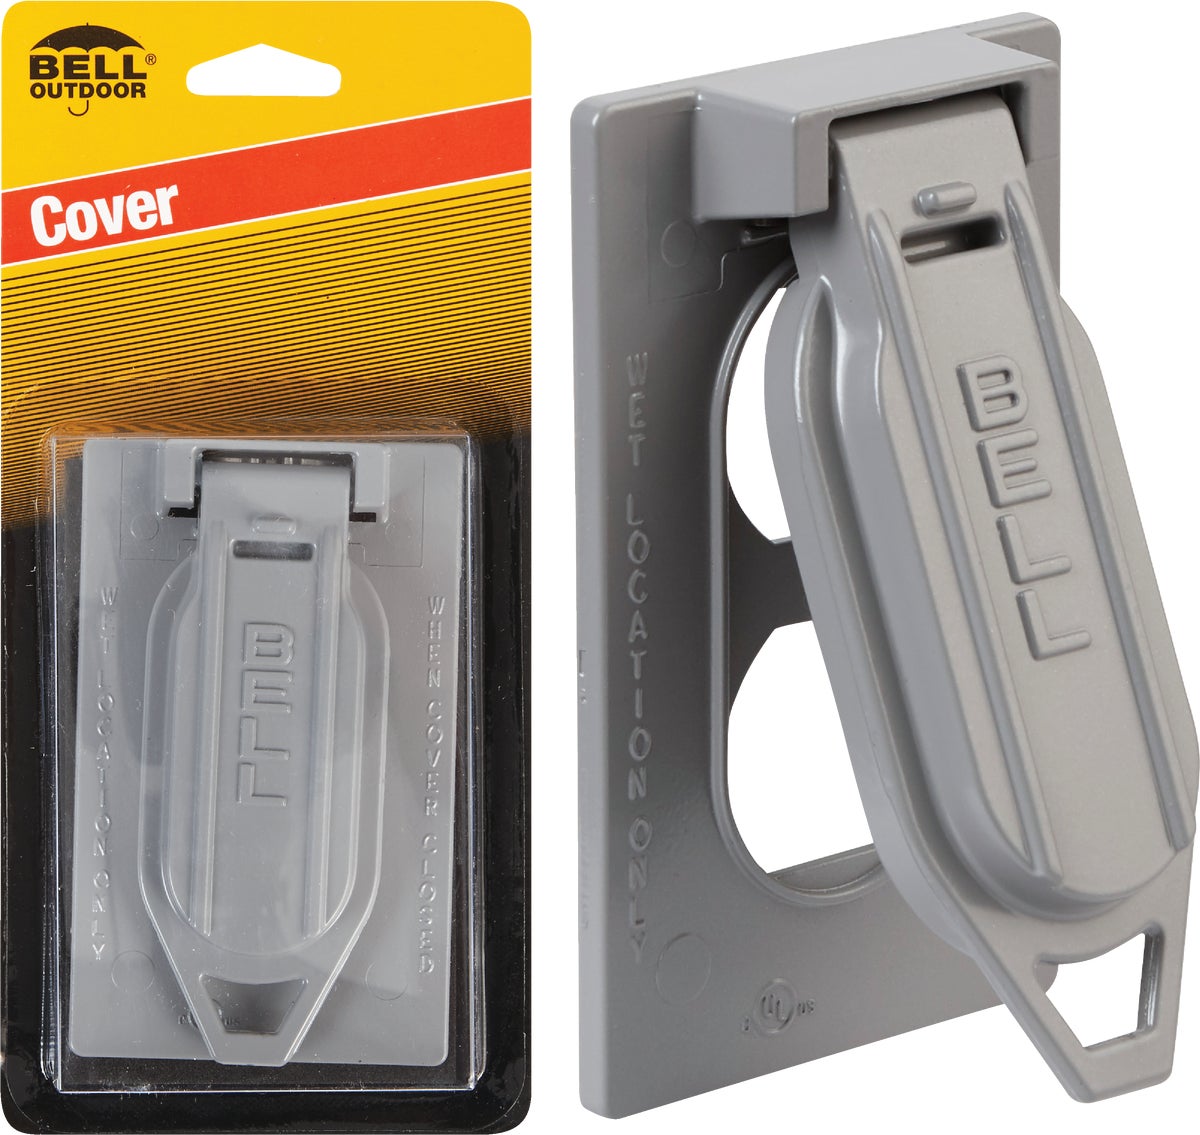 Details about   Hubbell Bell Outdoor Two Gang Device Cover Outlet Plate 